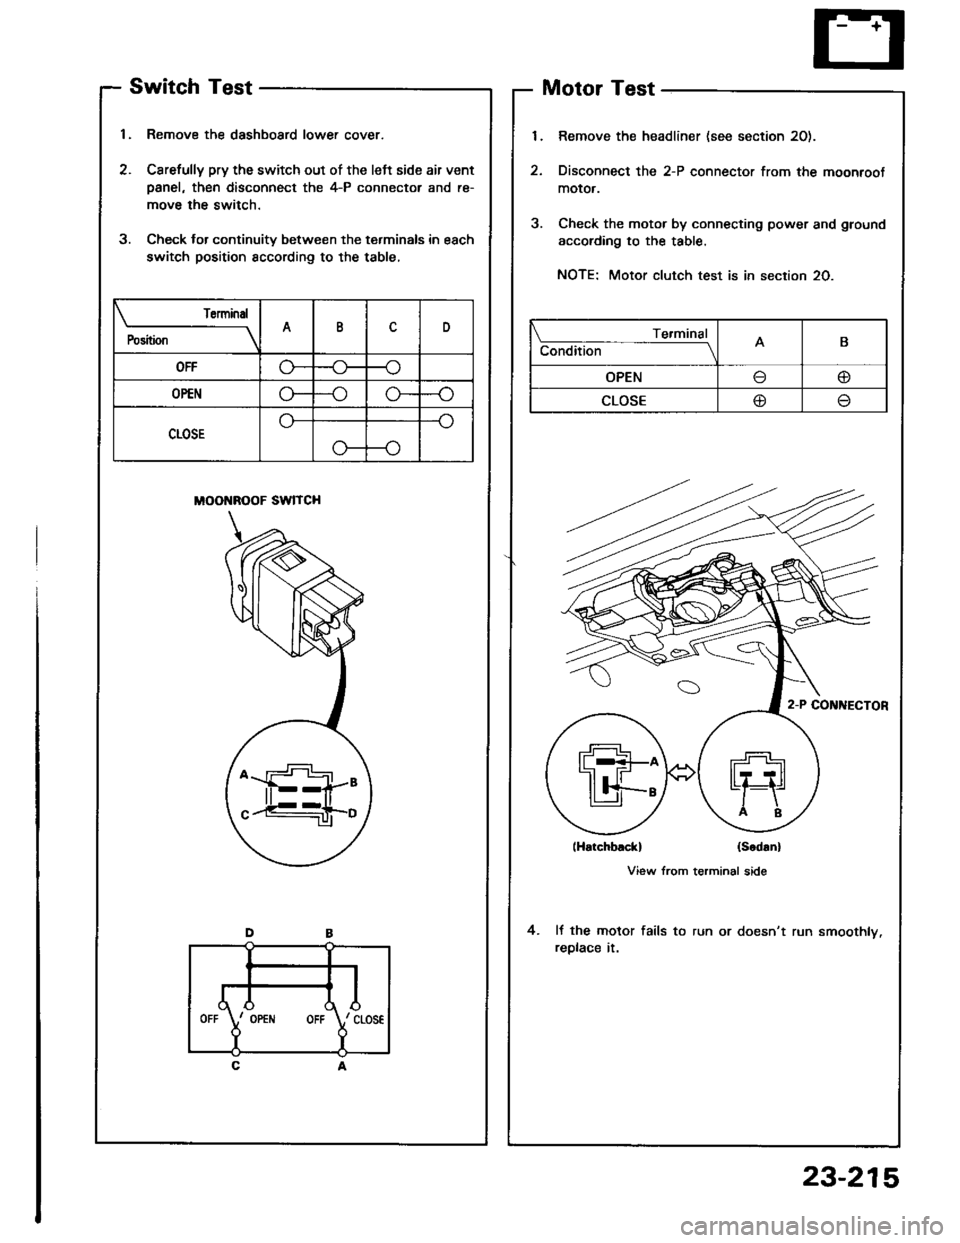 ACURA INTEGRA 1994  Service Service Manual Switch Test
1, Remove the dashboard lower cover.
2. Carefully pry the switch out of the left side air vent
Danel, then disconnect the 4-P connector and re-
move the switch.
3. Check lor continuity bet